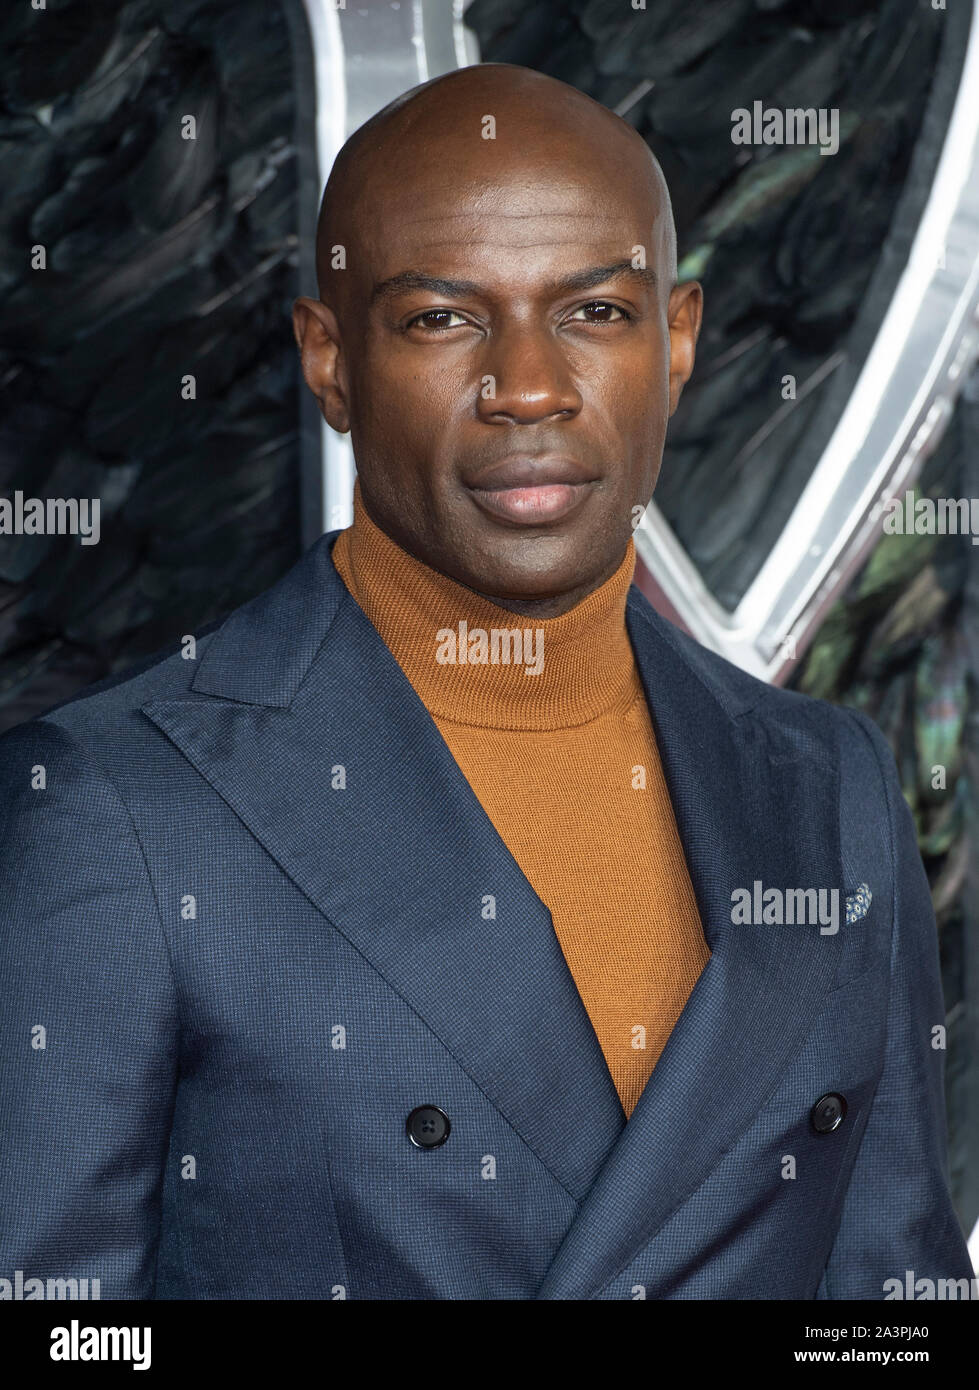 LONDON - ENGLAND - OCT 9. David Gyasi attends the ‘Maleficent: Mistress of Evil’ European Premiere at the BFI Imax, Waterloo, London, England on the 9th October 2019. Gary Mitchell/Alamy Live News Stock Photo